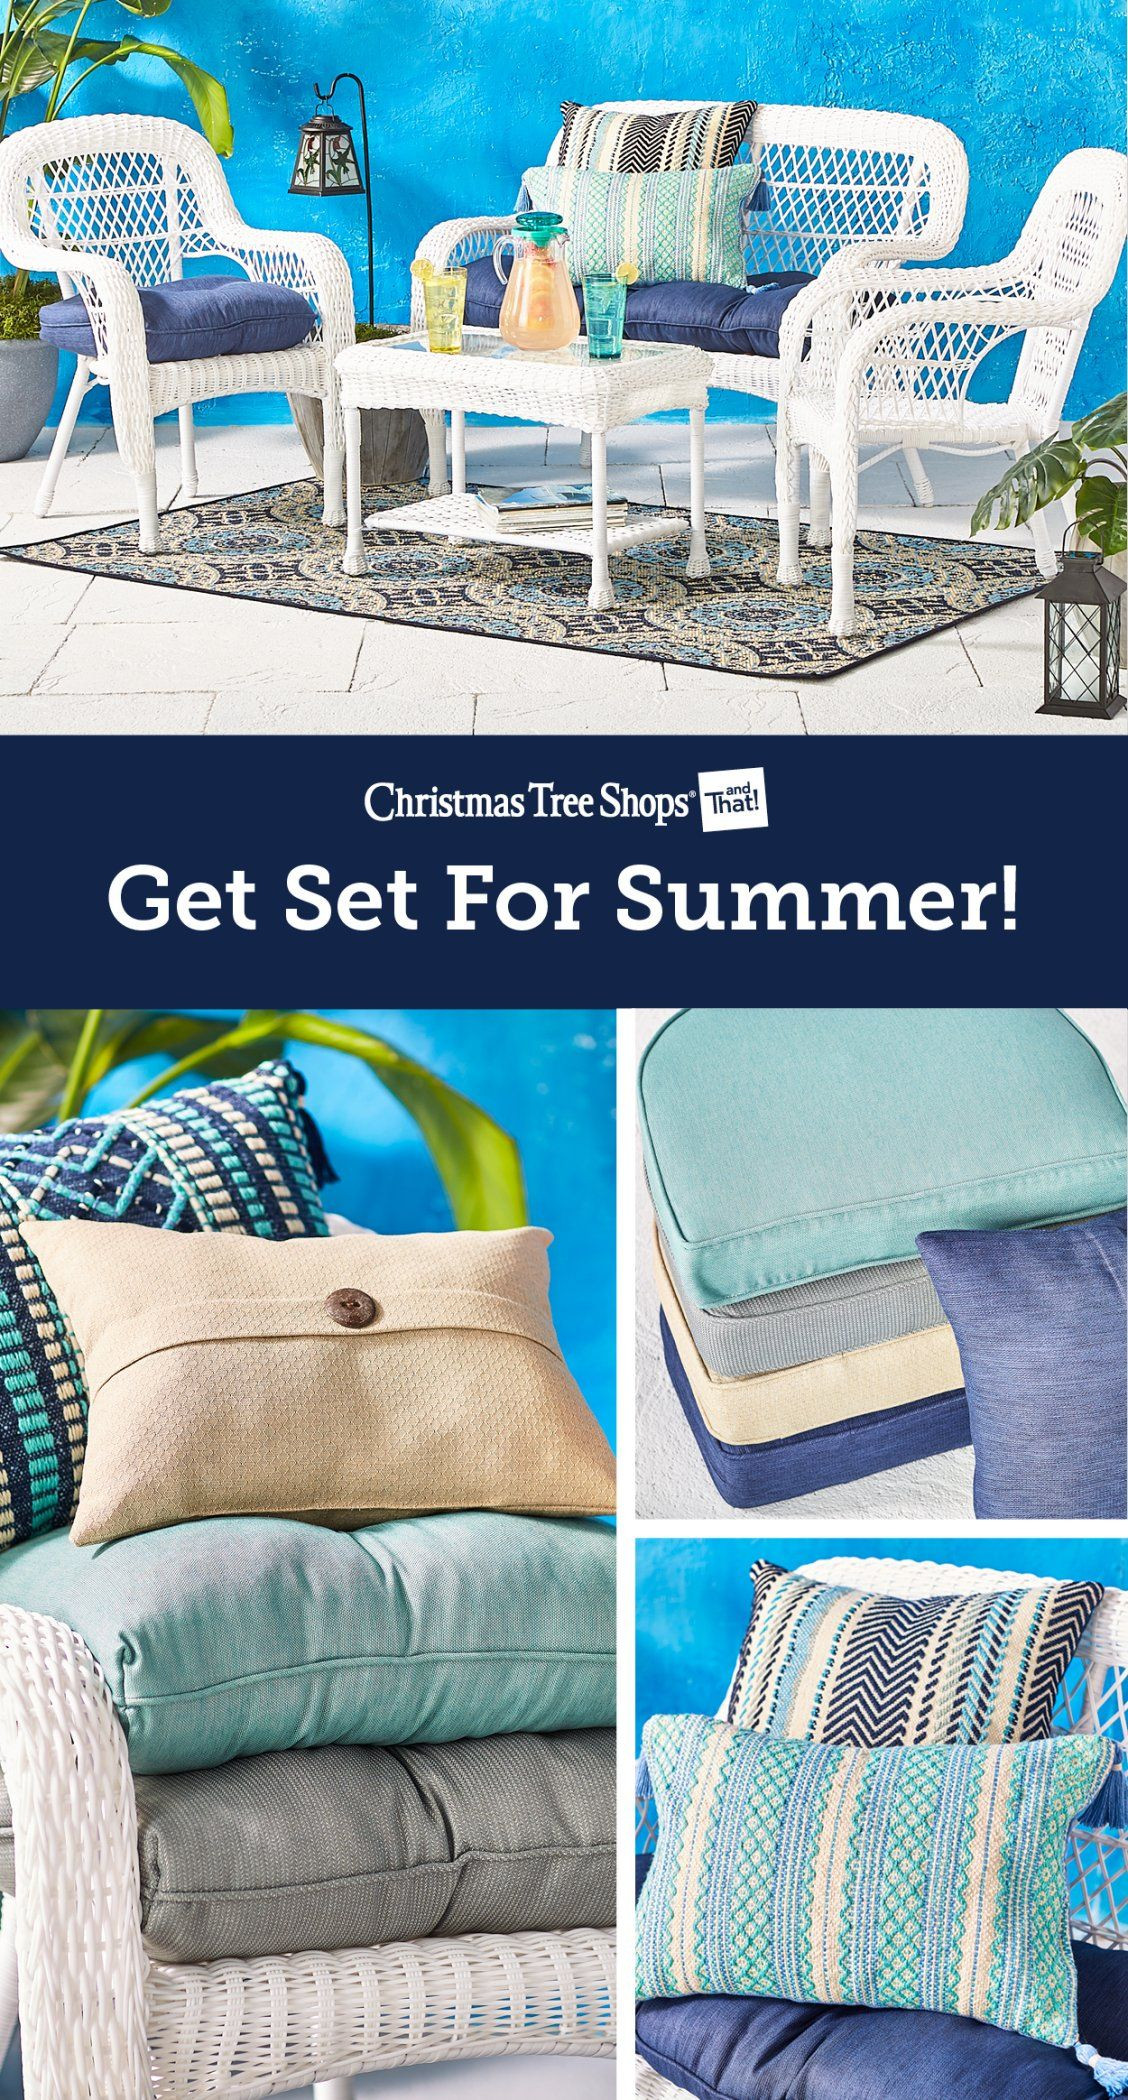 Christmas Tree Shop Patio Sets
 Create the perfect summer escape on your patio or deck